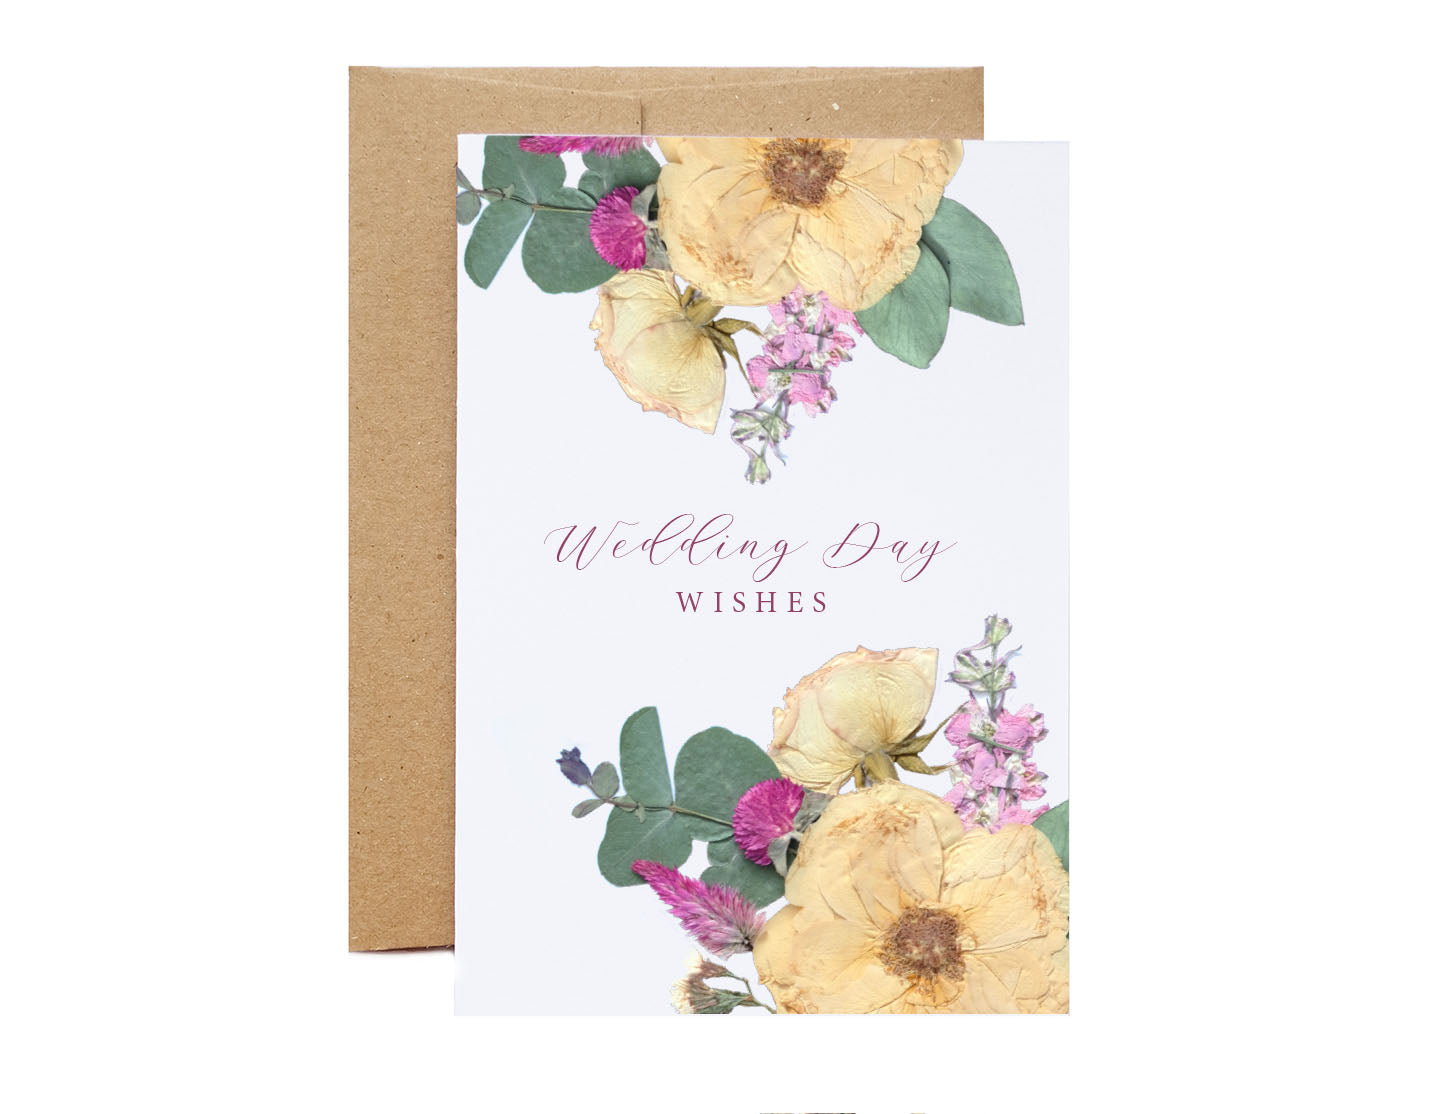 wedding day wishes pressed flower roses white and pink flowers